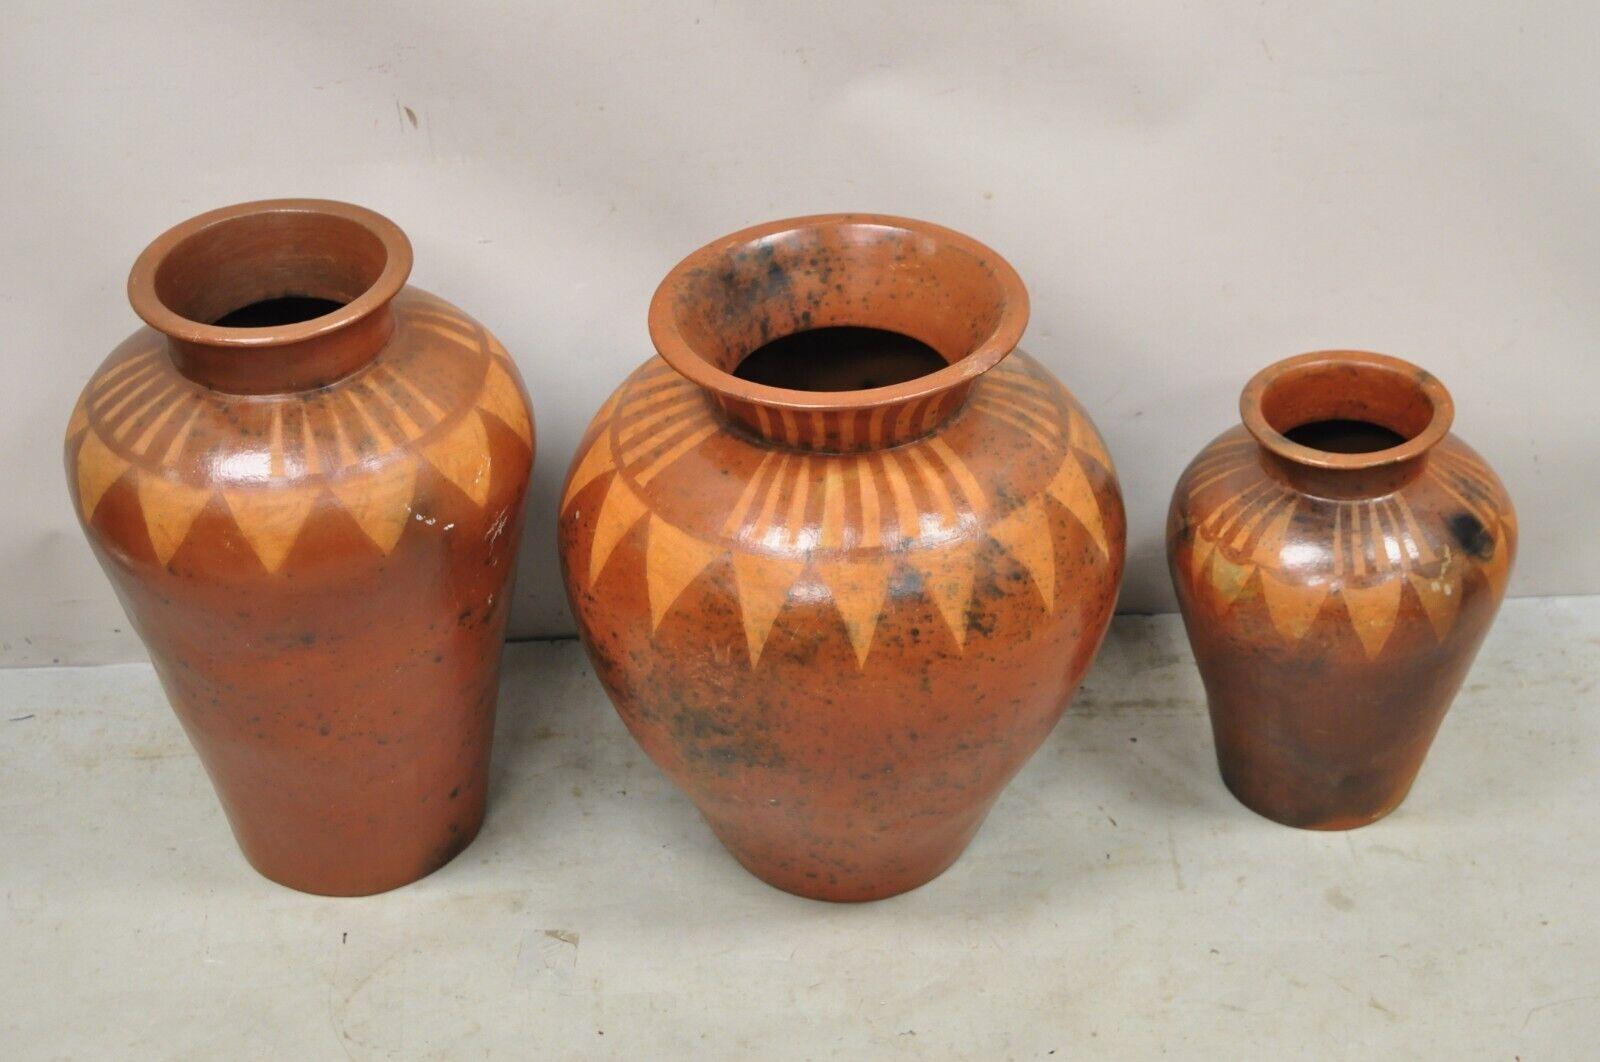 Lombok Crafts Indonesian Terracotta Clay Pottery Graduating Pot Jugs- Set of 3. Item features  3 graduating sizes, attractive fired finish, very nice set, quality craftsmanship, great style and form. Circa Late 20th Century.
Measurements: 
Large: